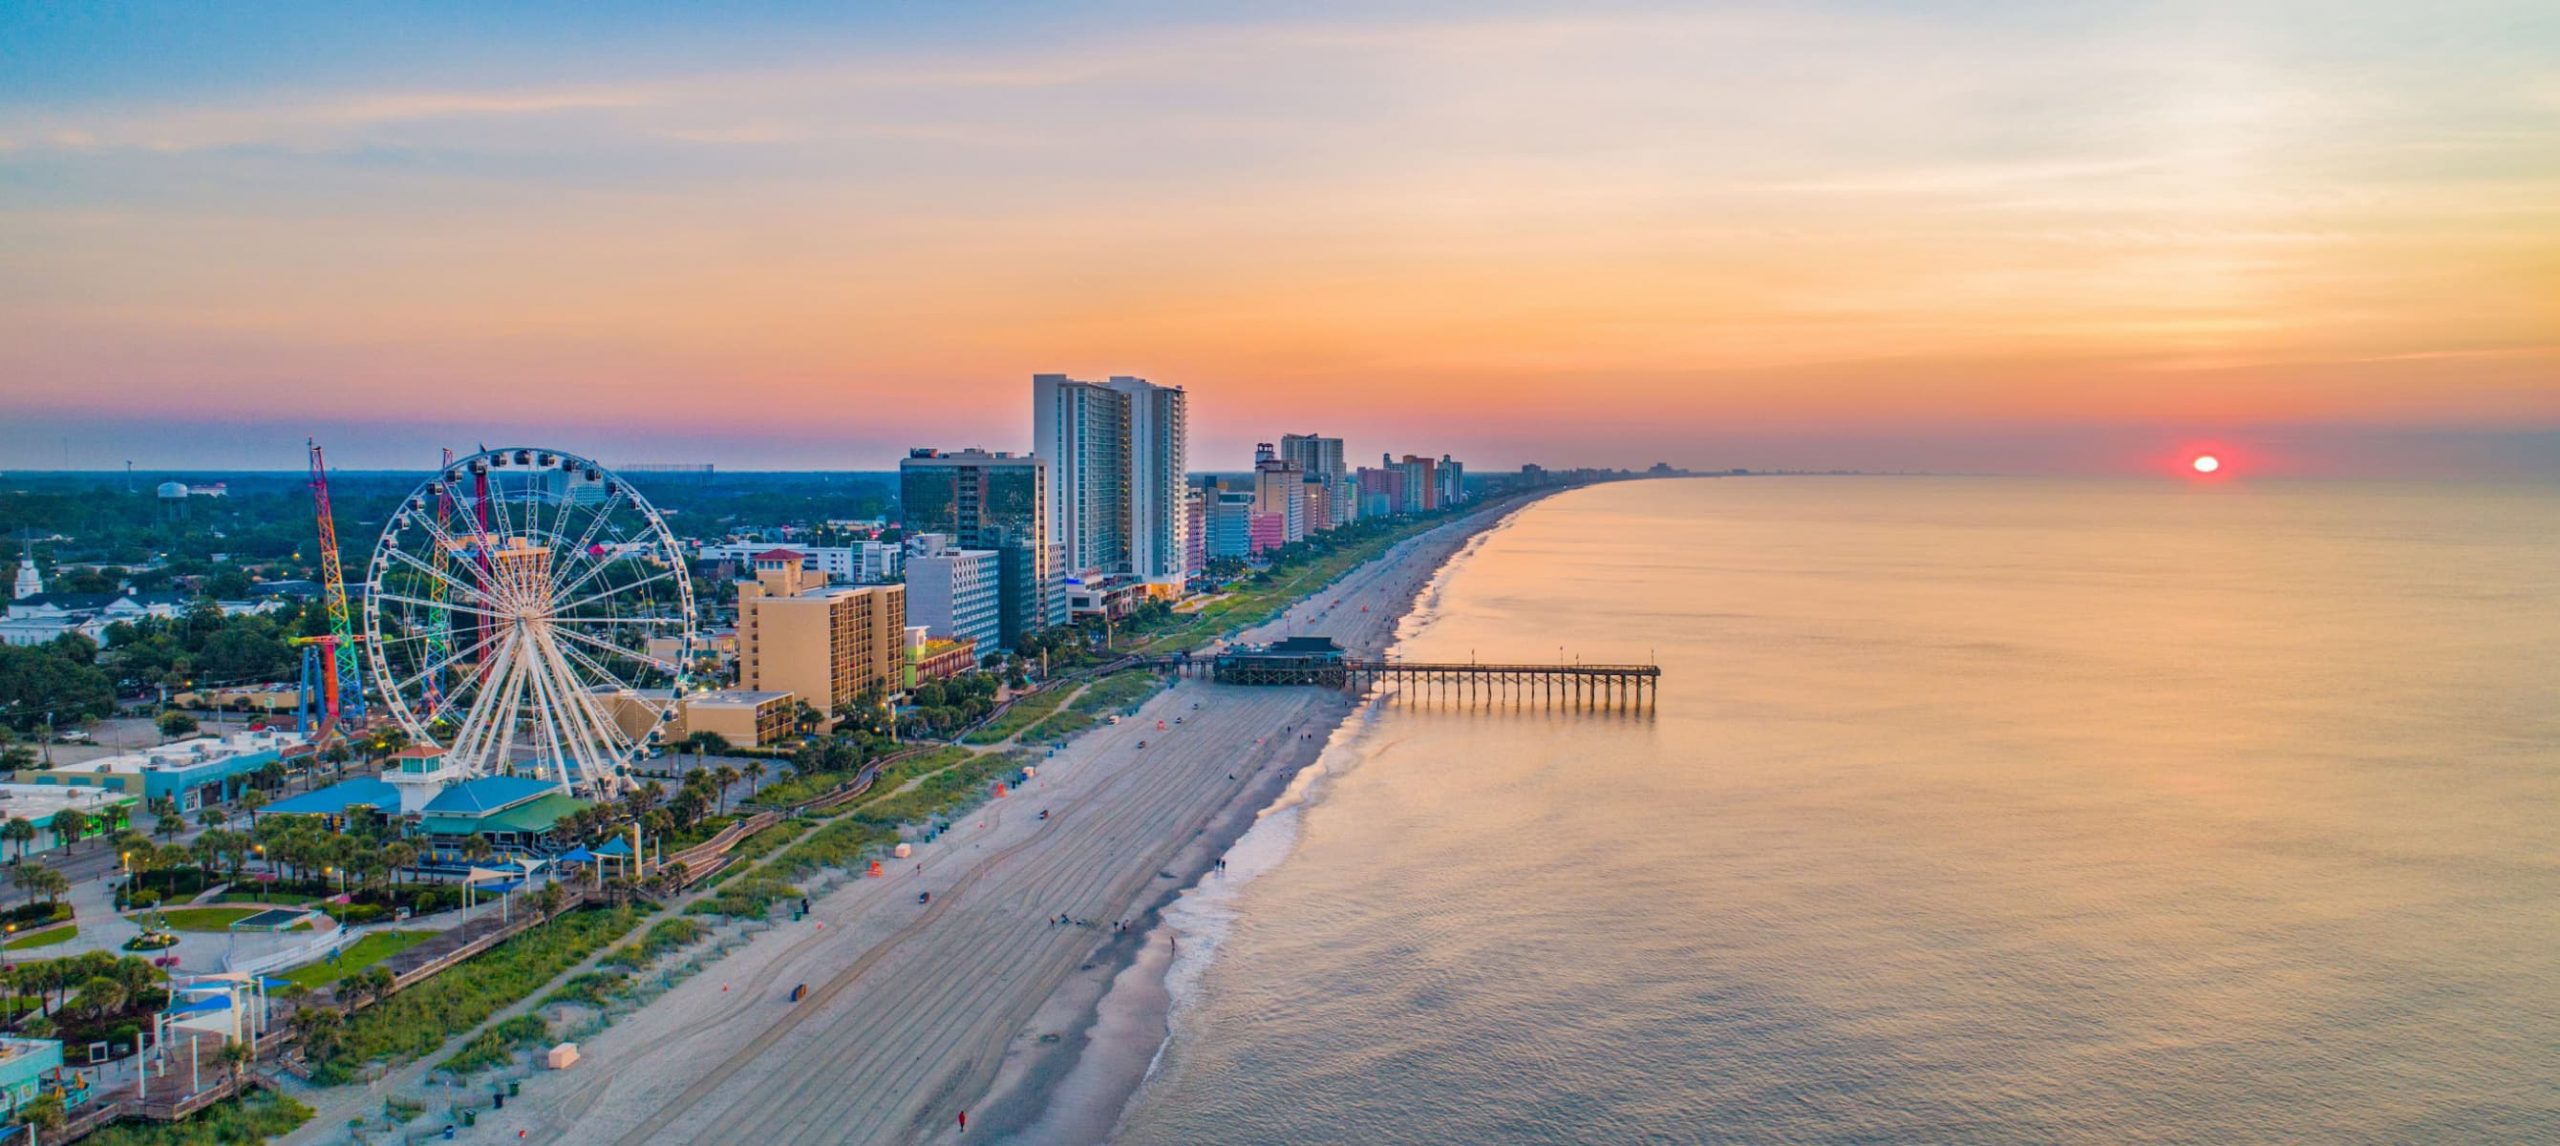 The Ultimate 12 Best Things To Do in Myrtle Beach, South Carolina